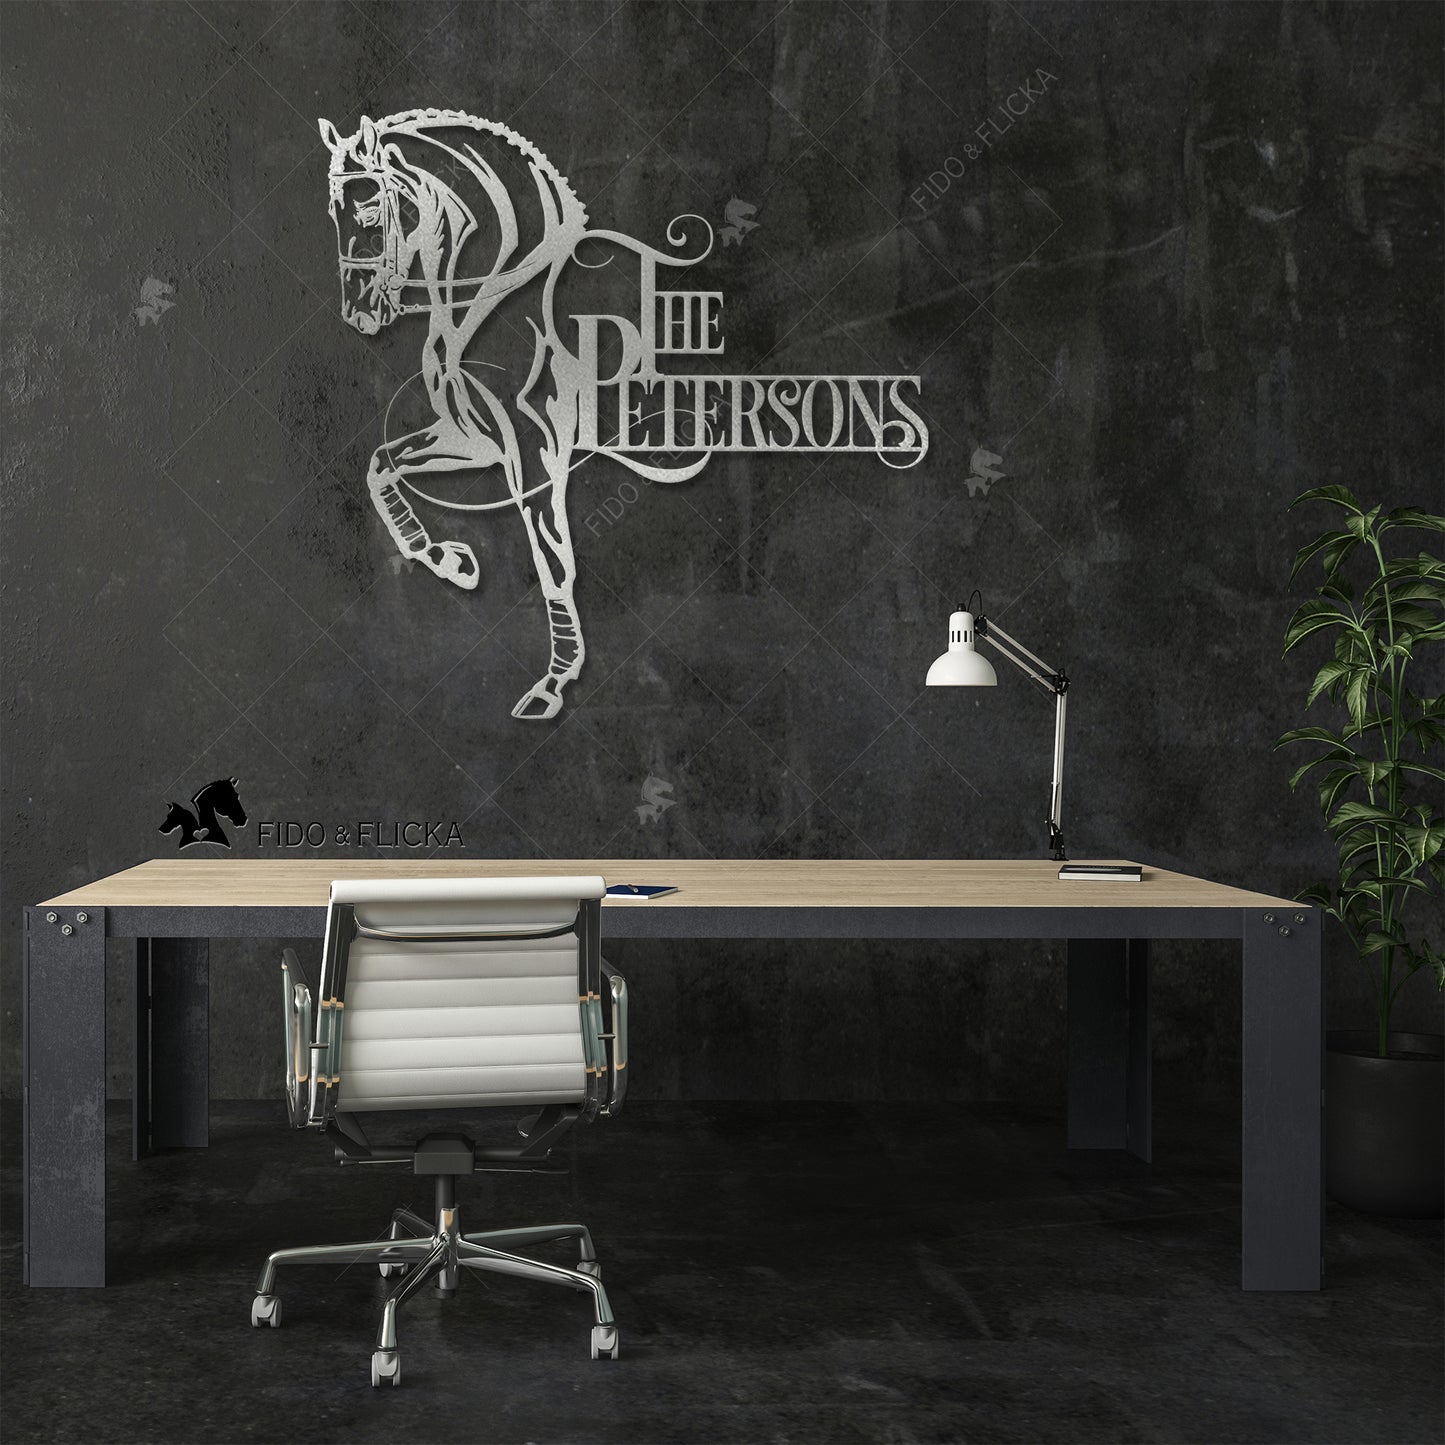 personalized silver dressage horse metal sign in dark office